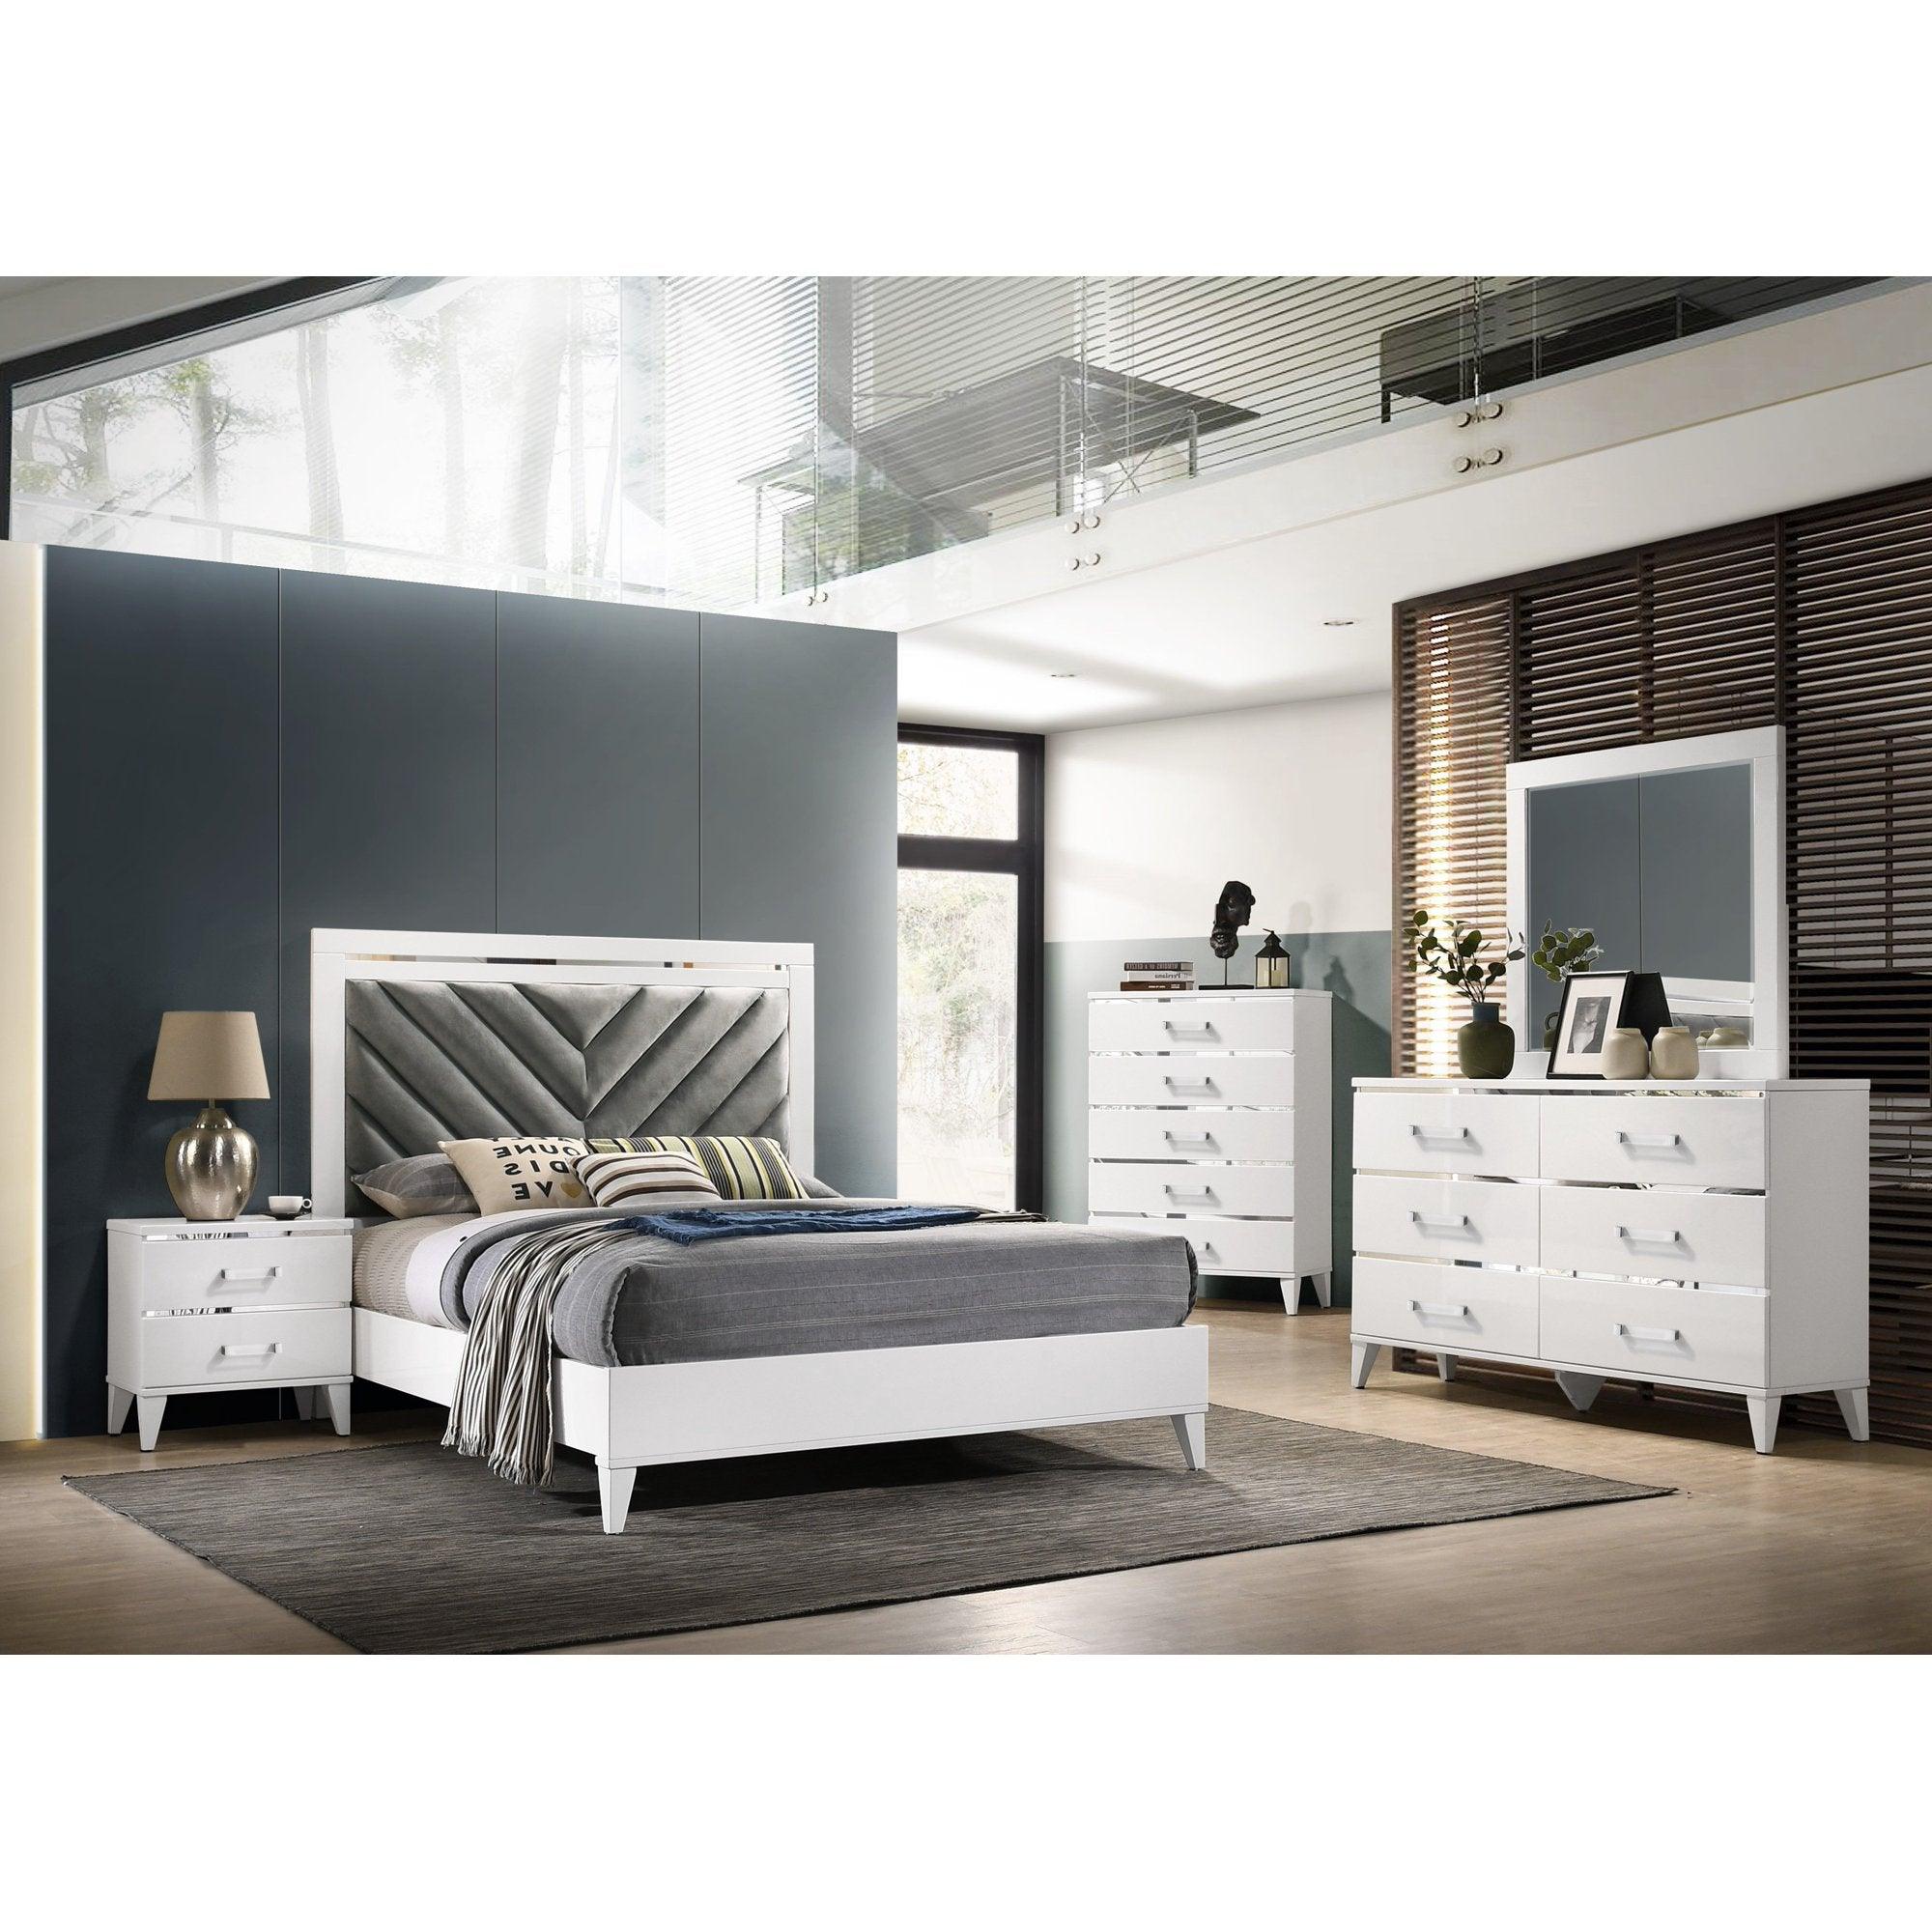 Transform Your Bedroom with LoveYourBed.co.uk's Stunning Bedroom Furniture - loveyourbed.co.uk